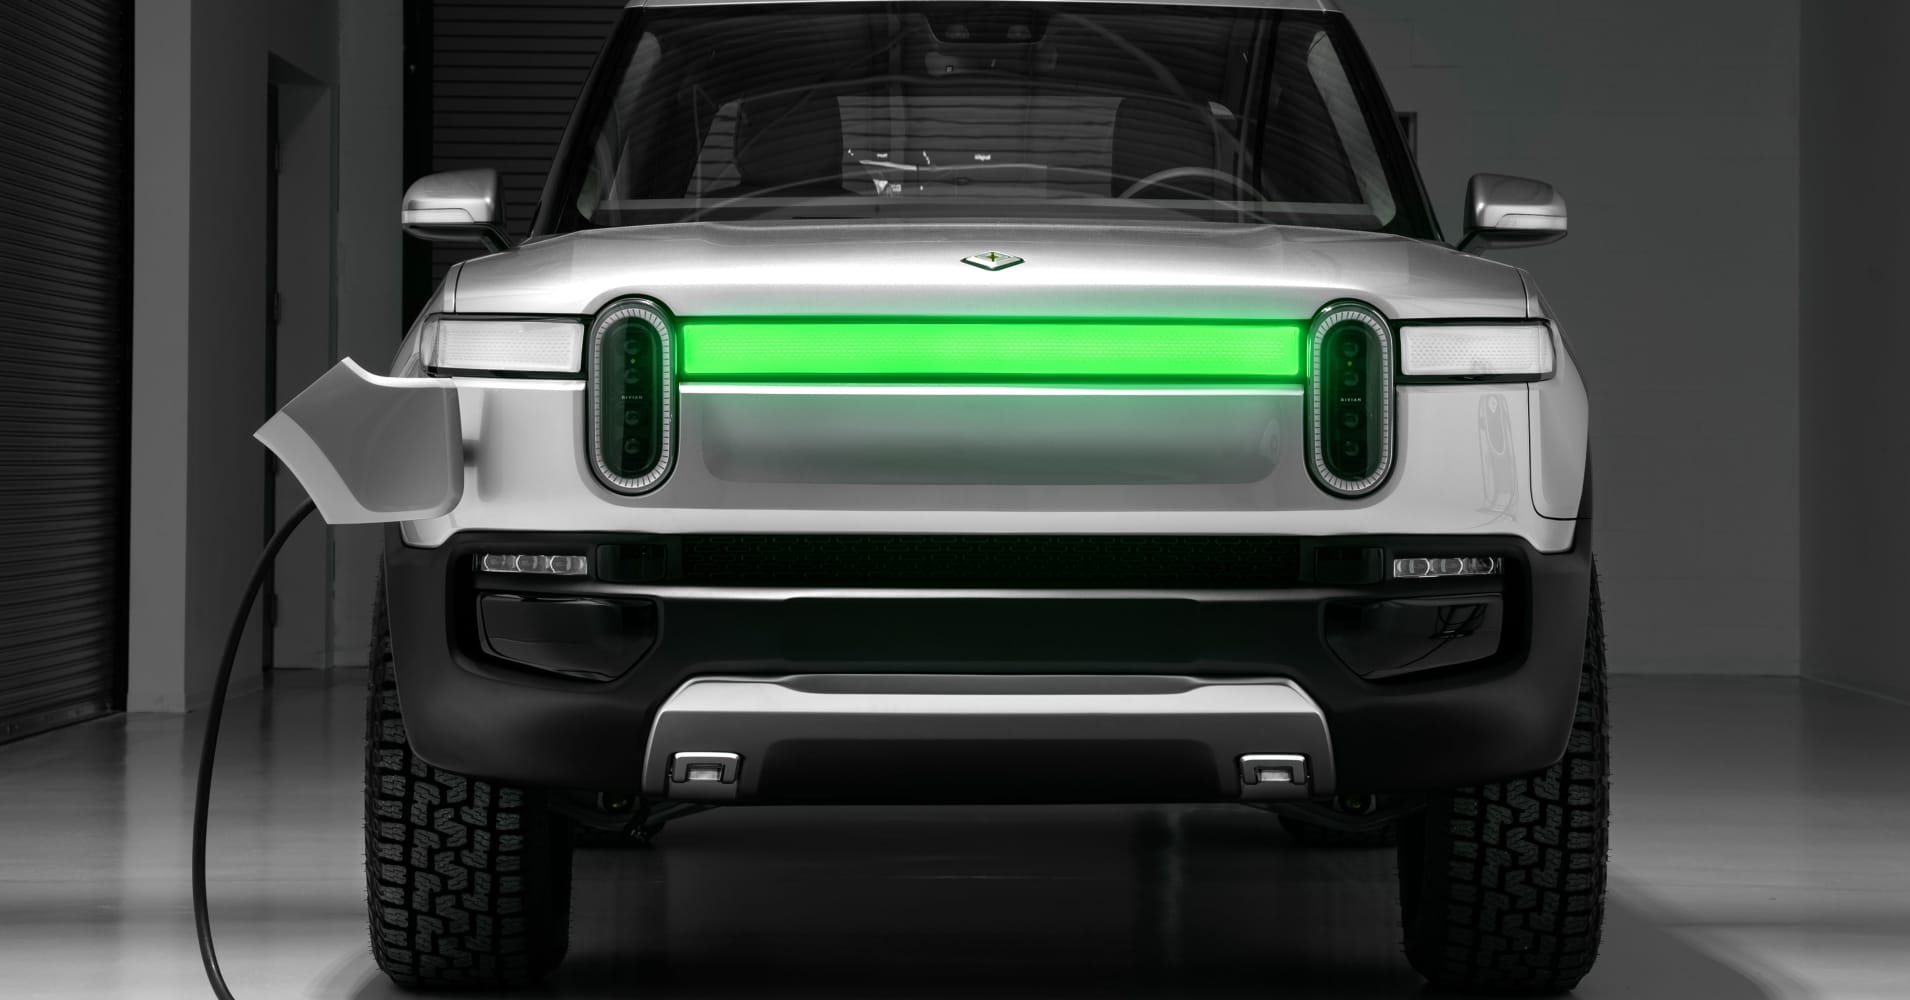 Rivian announces $700 million investment round led by Amazon